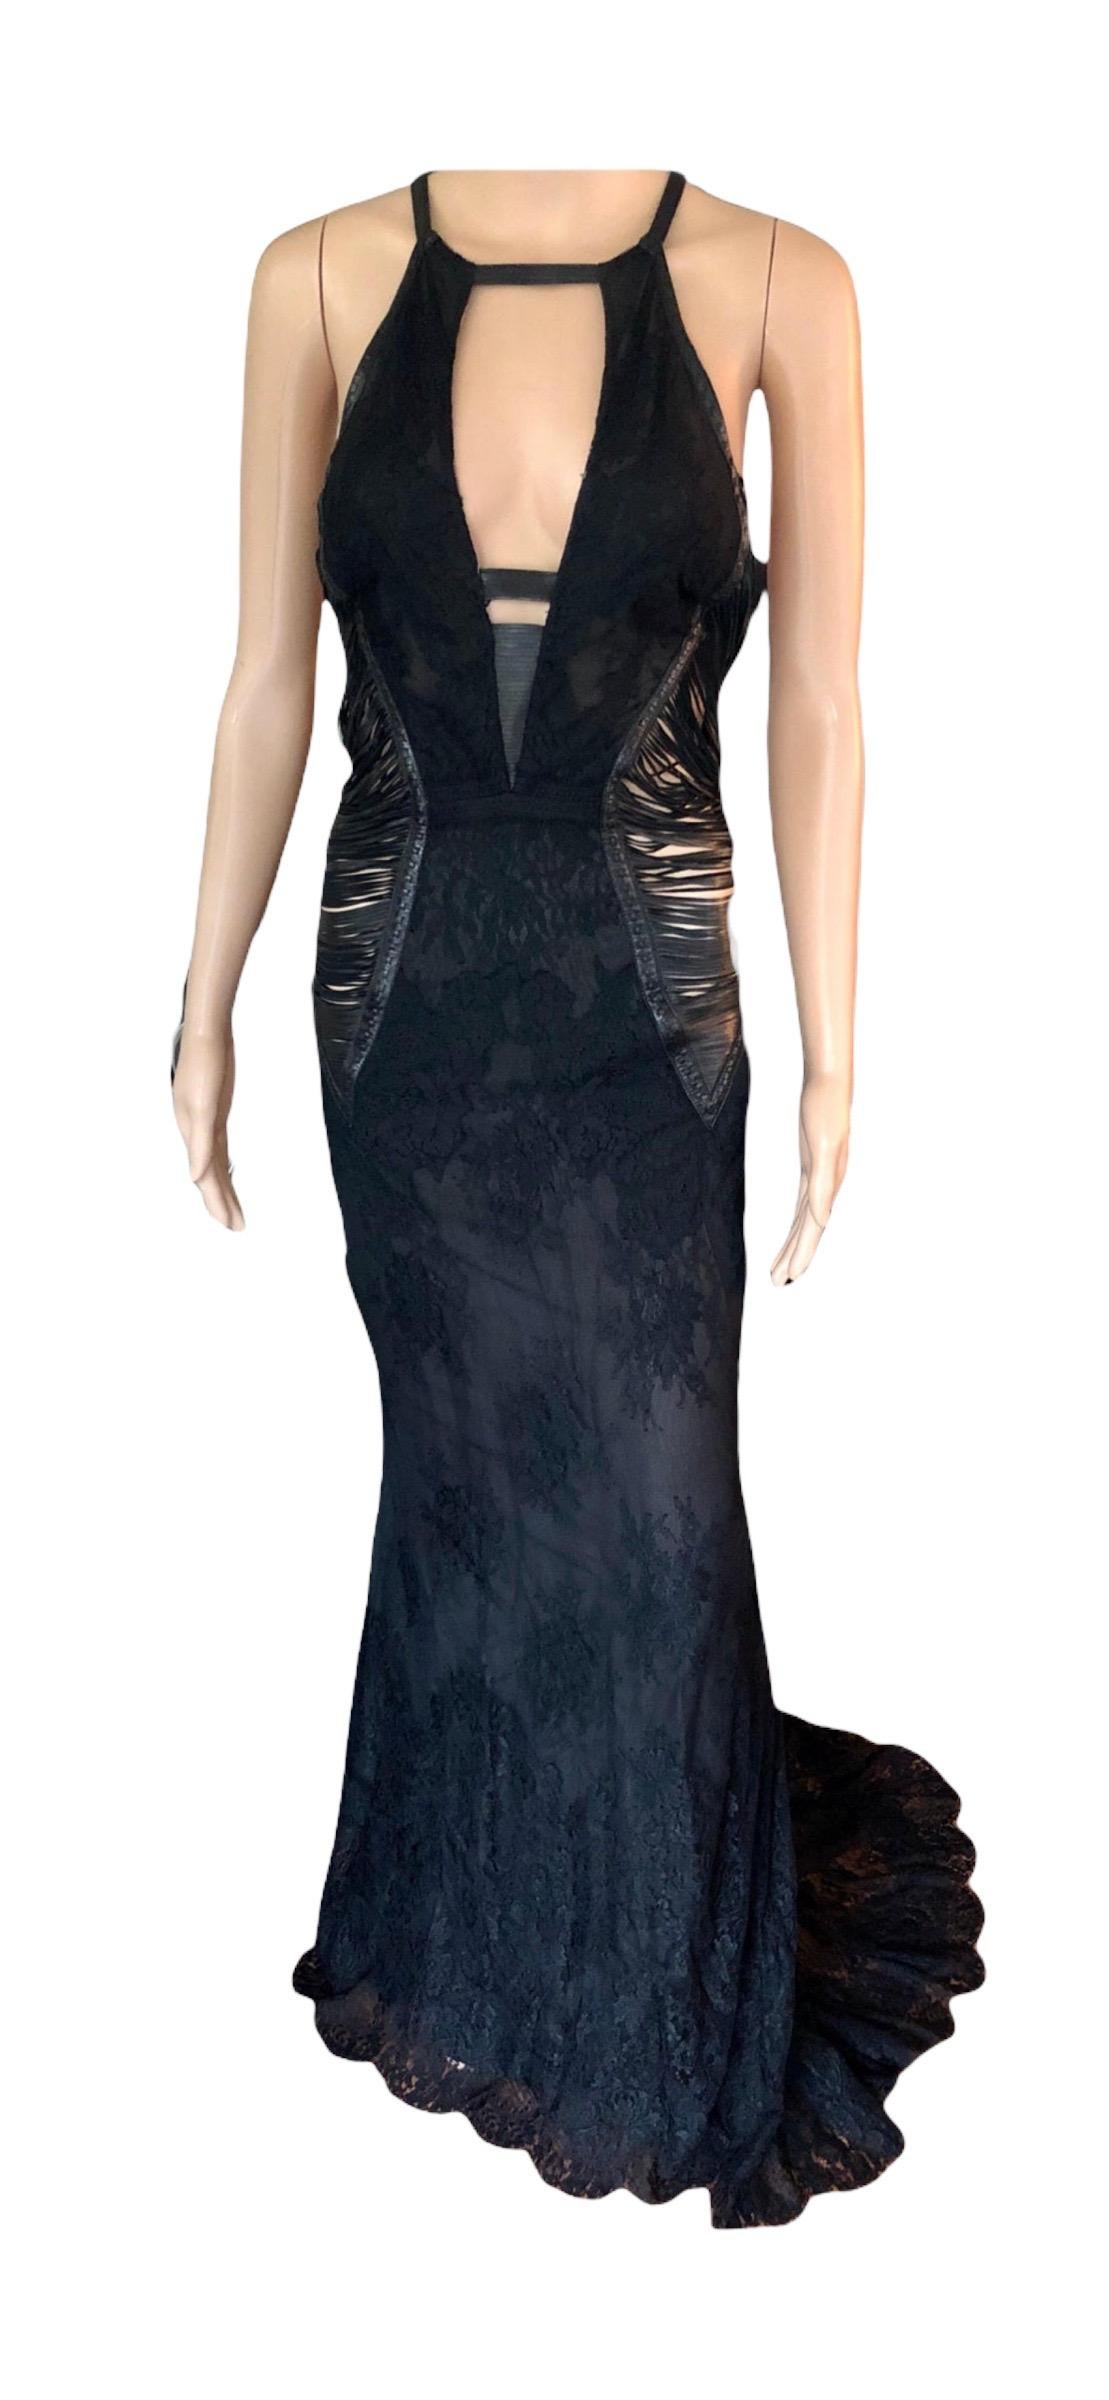 Roberto Cavalli S/S 2013 Leather Cutout Open Back Black Evening Dress Gown For Sale 8